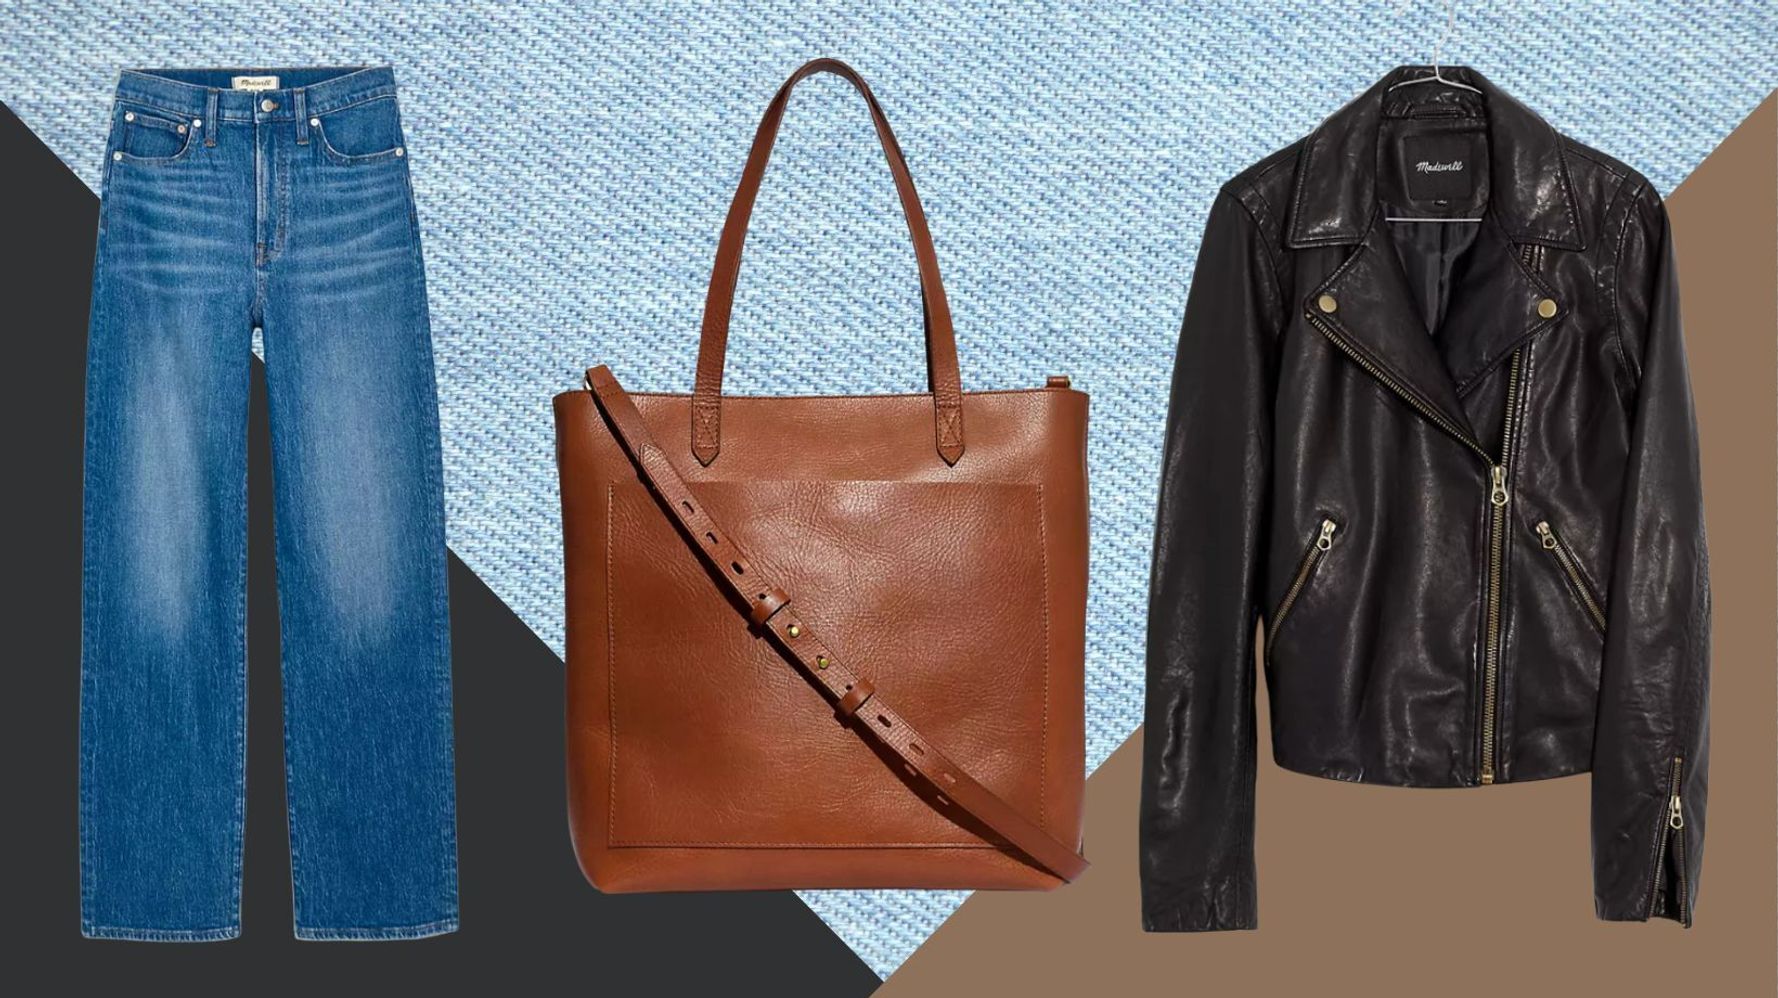 Don't miss the Madewell Transport Tote sale